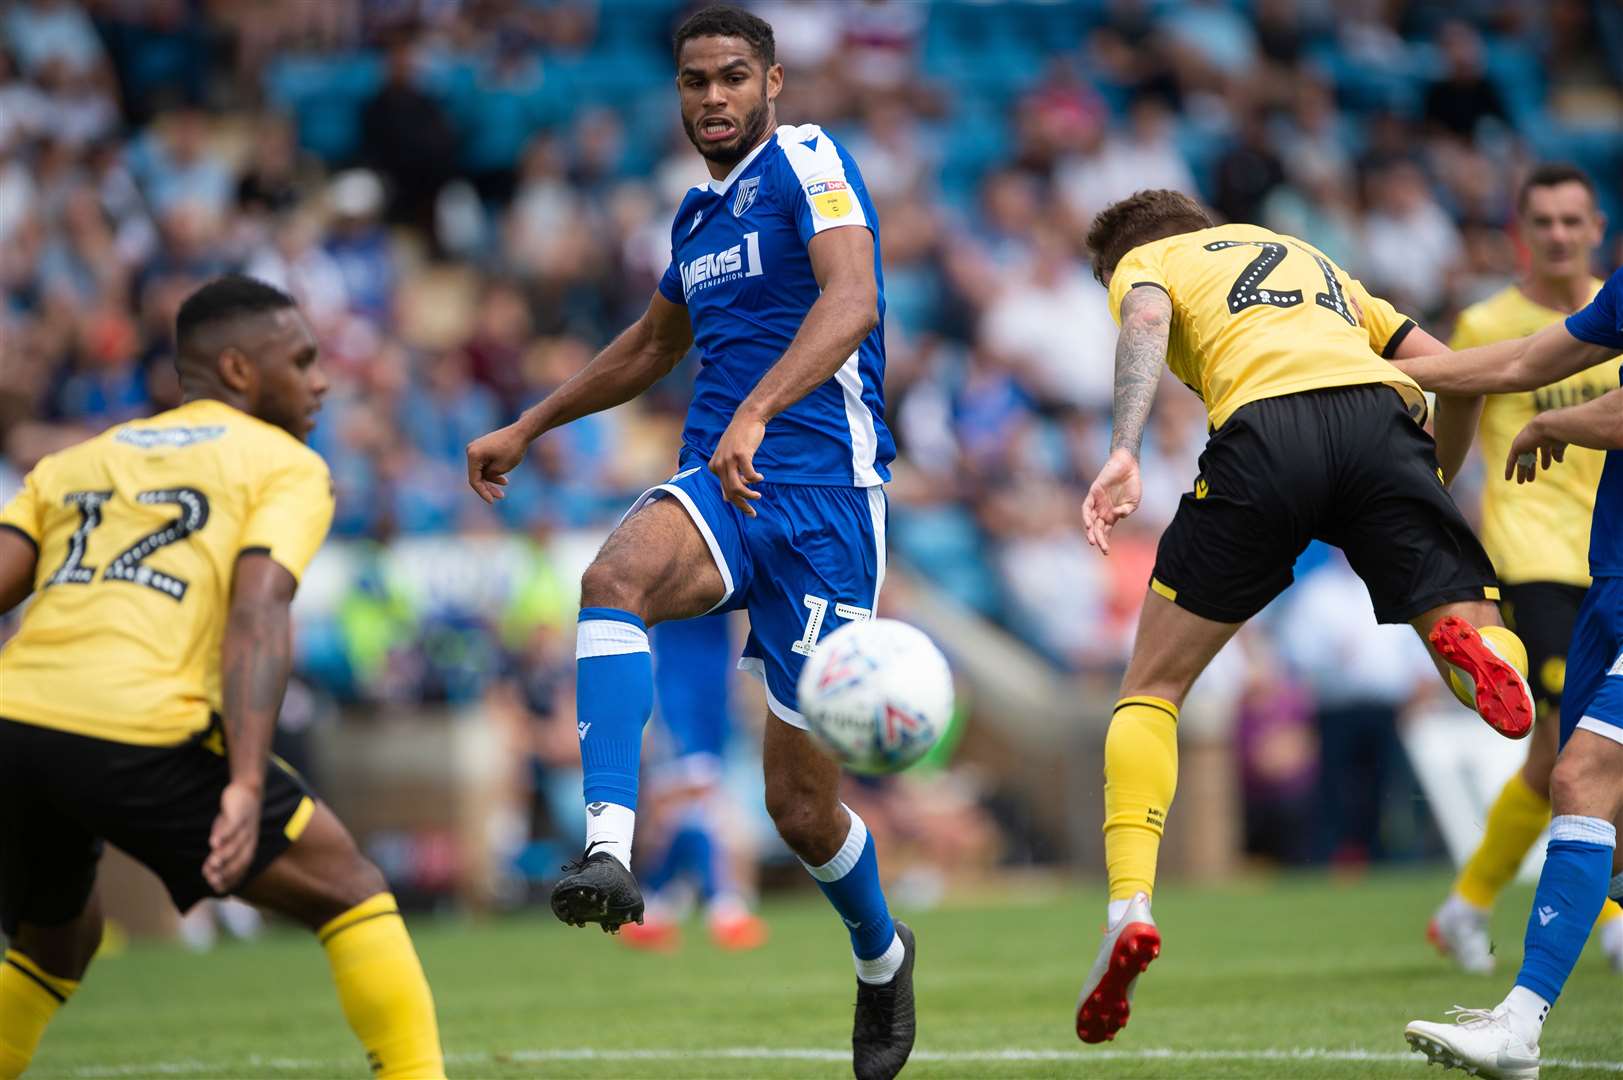 Mikael Mandron on the ball for Gillingham against Millwall Picture: Ady Kerry